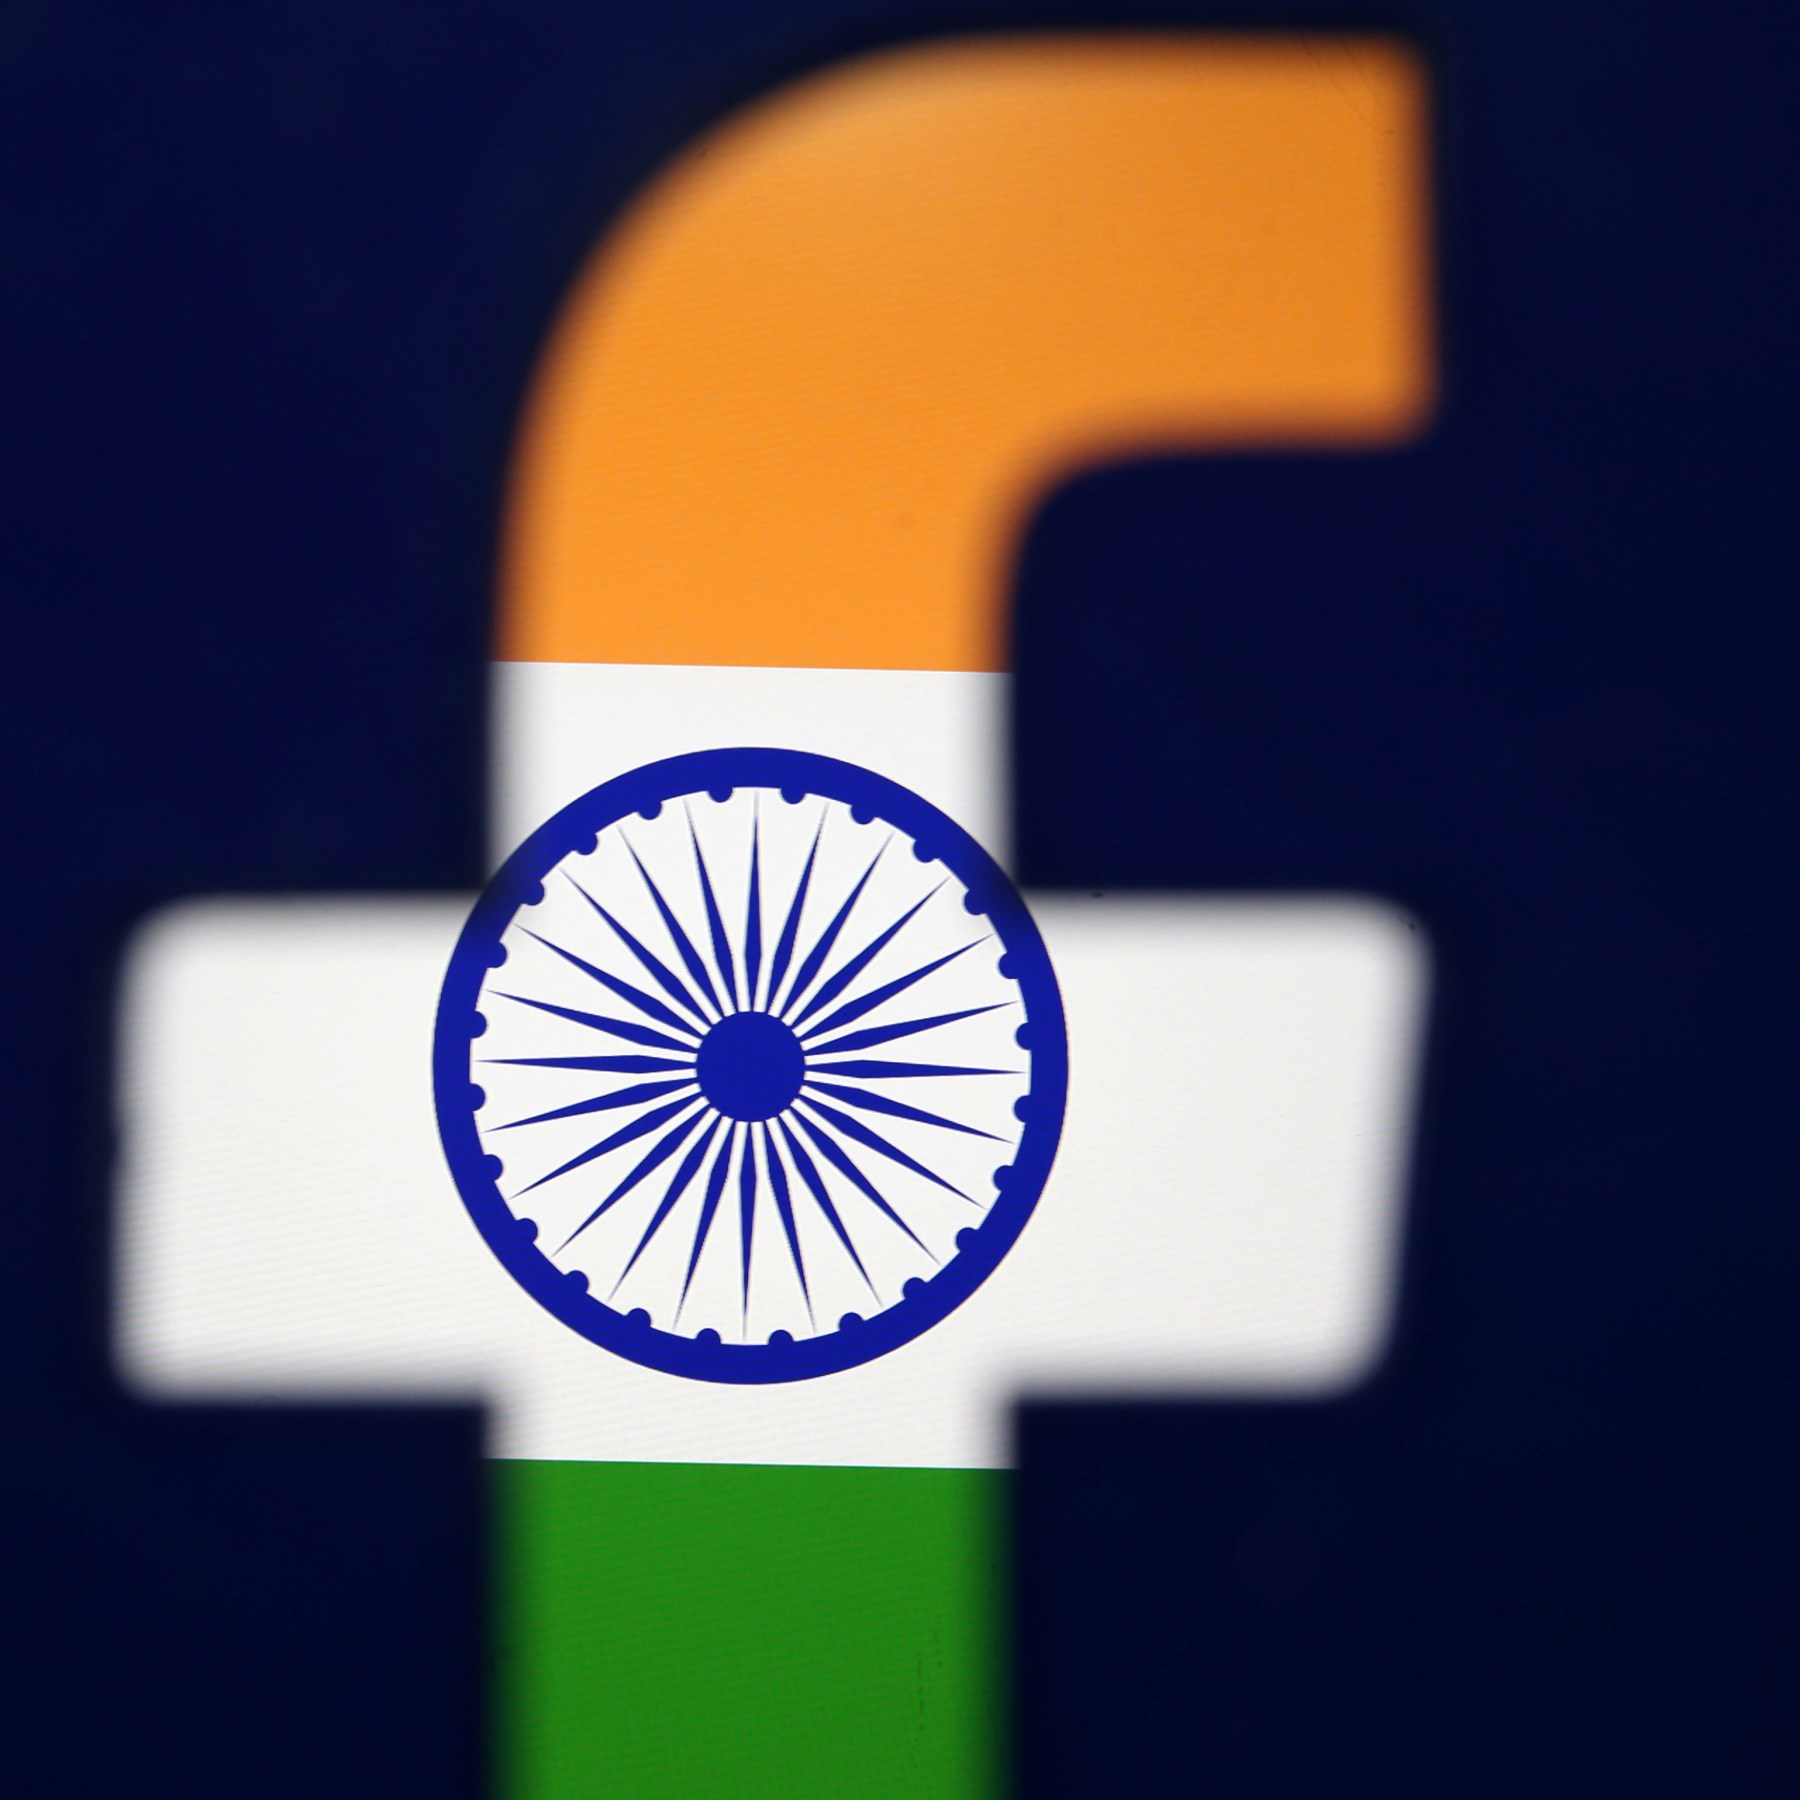 What helps India's BJP get lower Facebook rates? Divisive content |  Business and Economy News | Al Jazeera